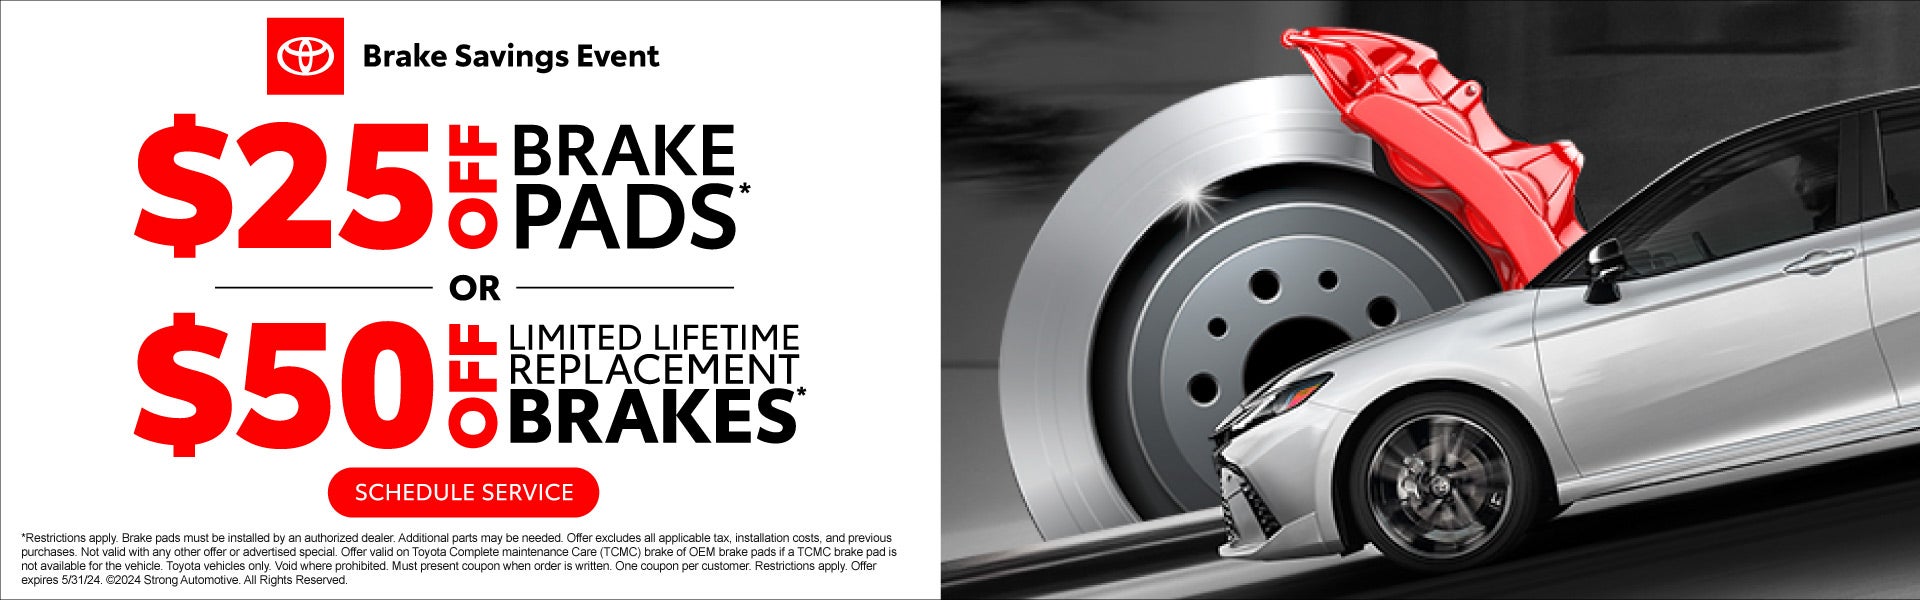 Brake Savings Event going on now at Sparks Toyota!